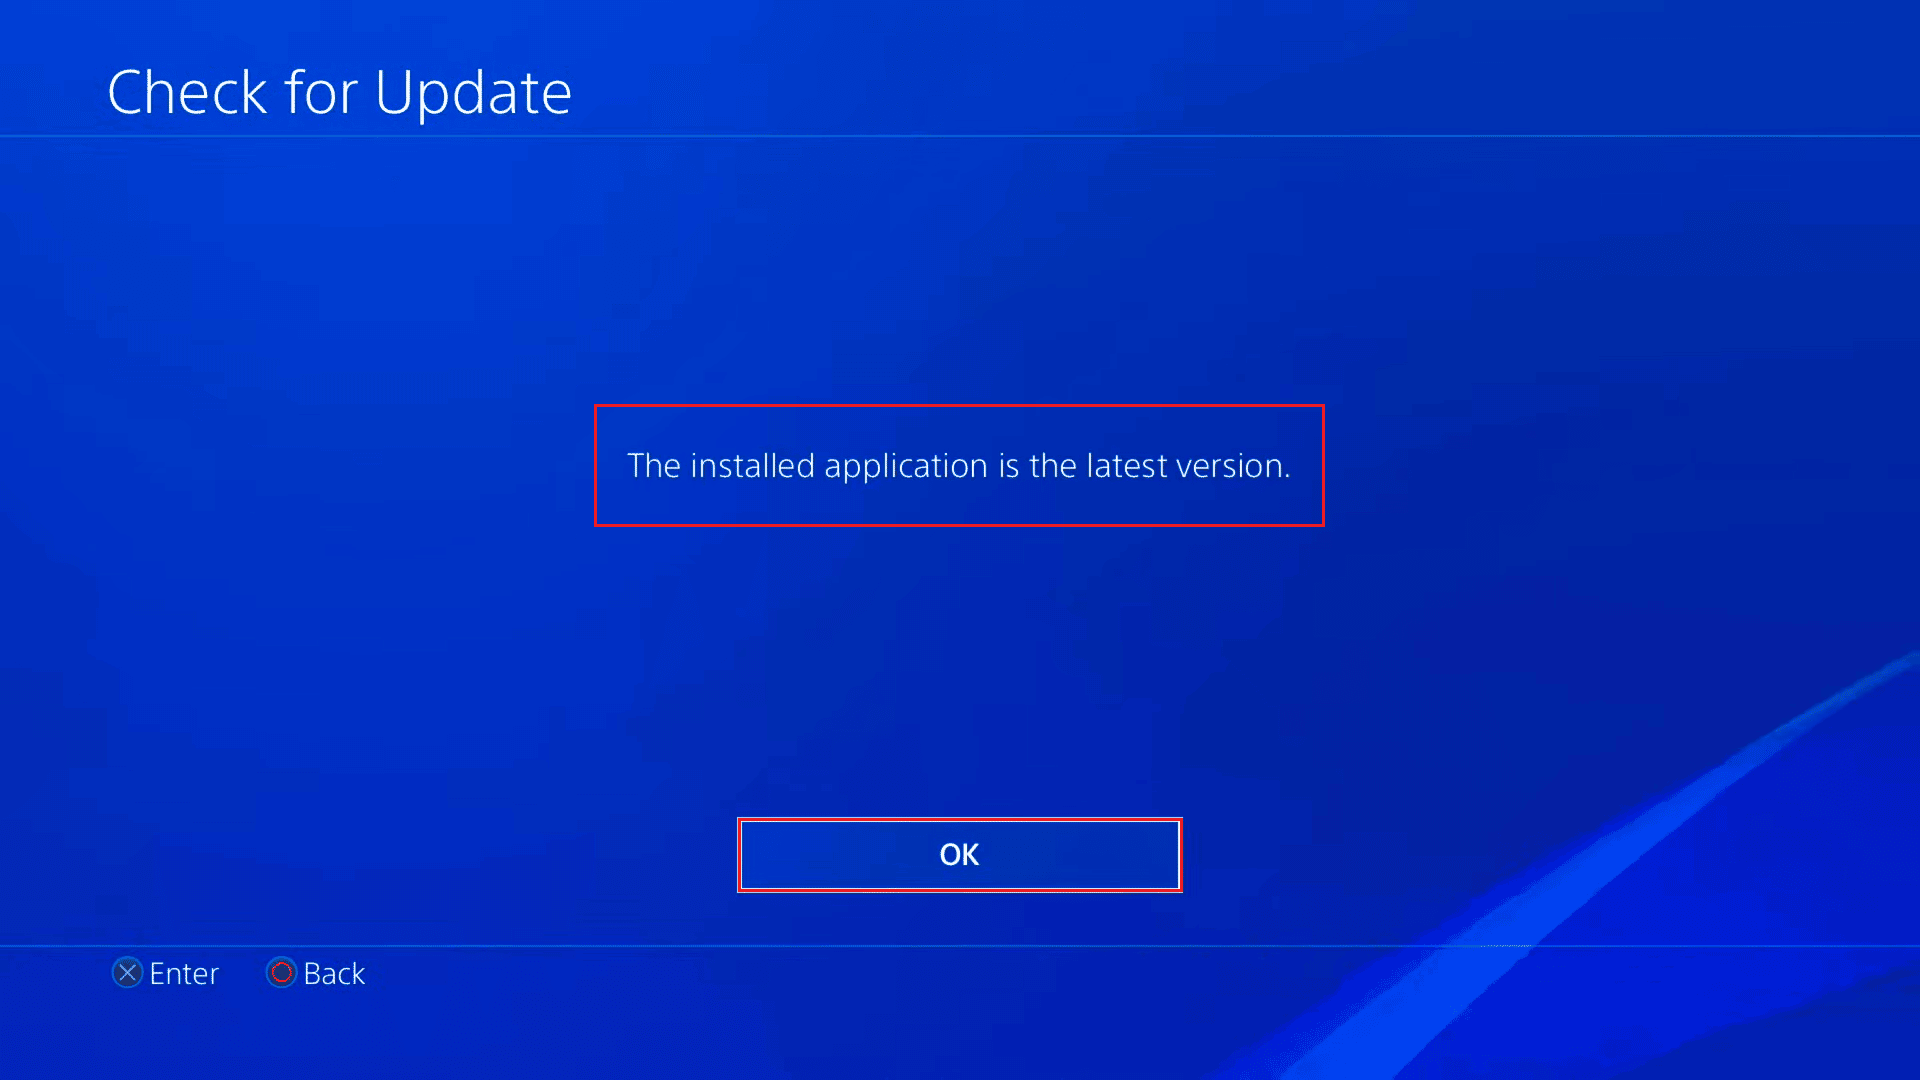 The installed application is the latest version in playstation 4 ps4